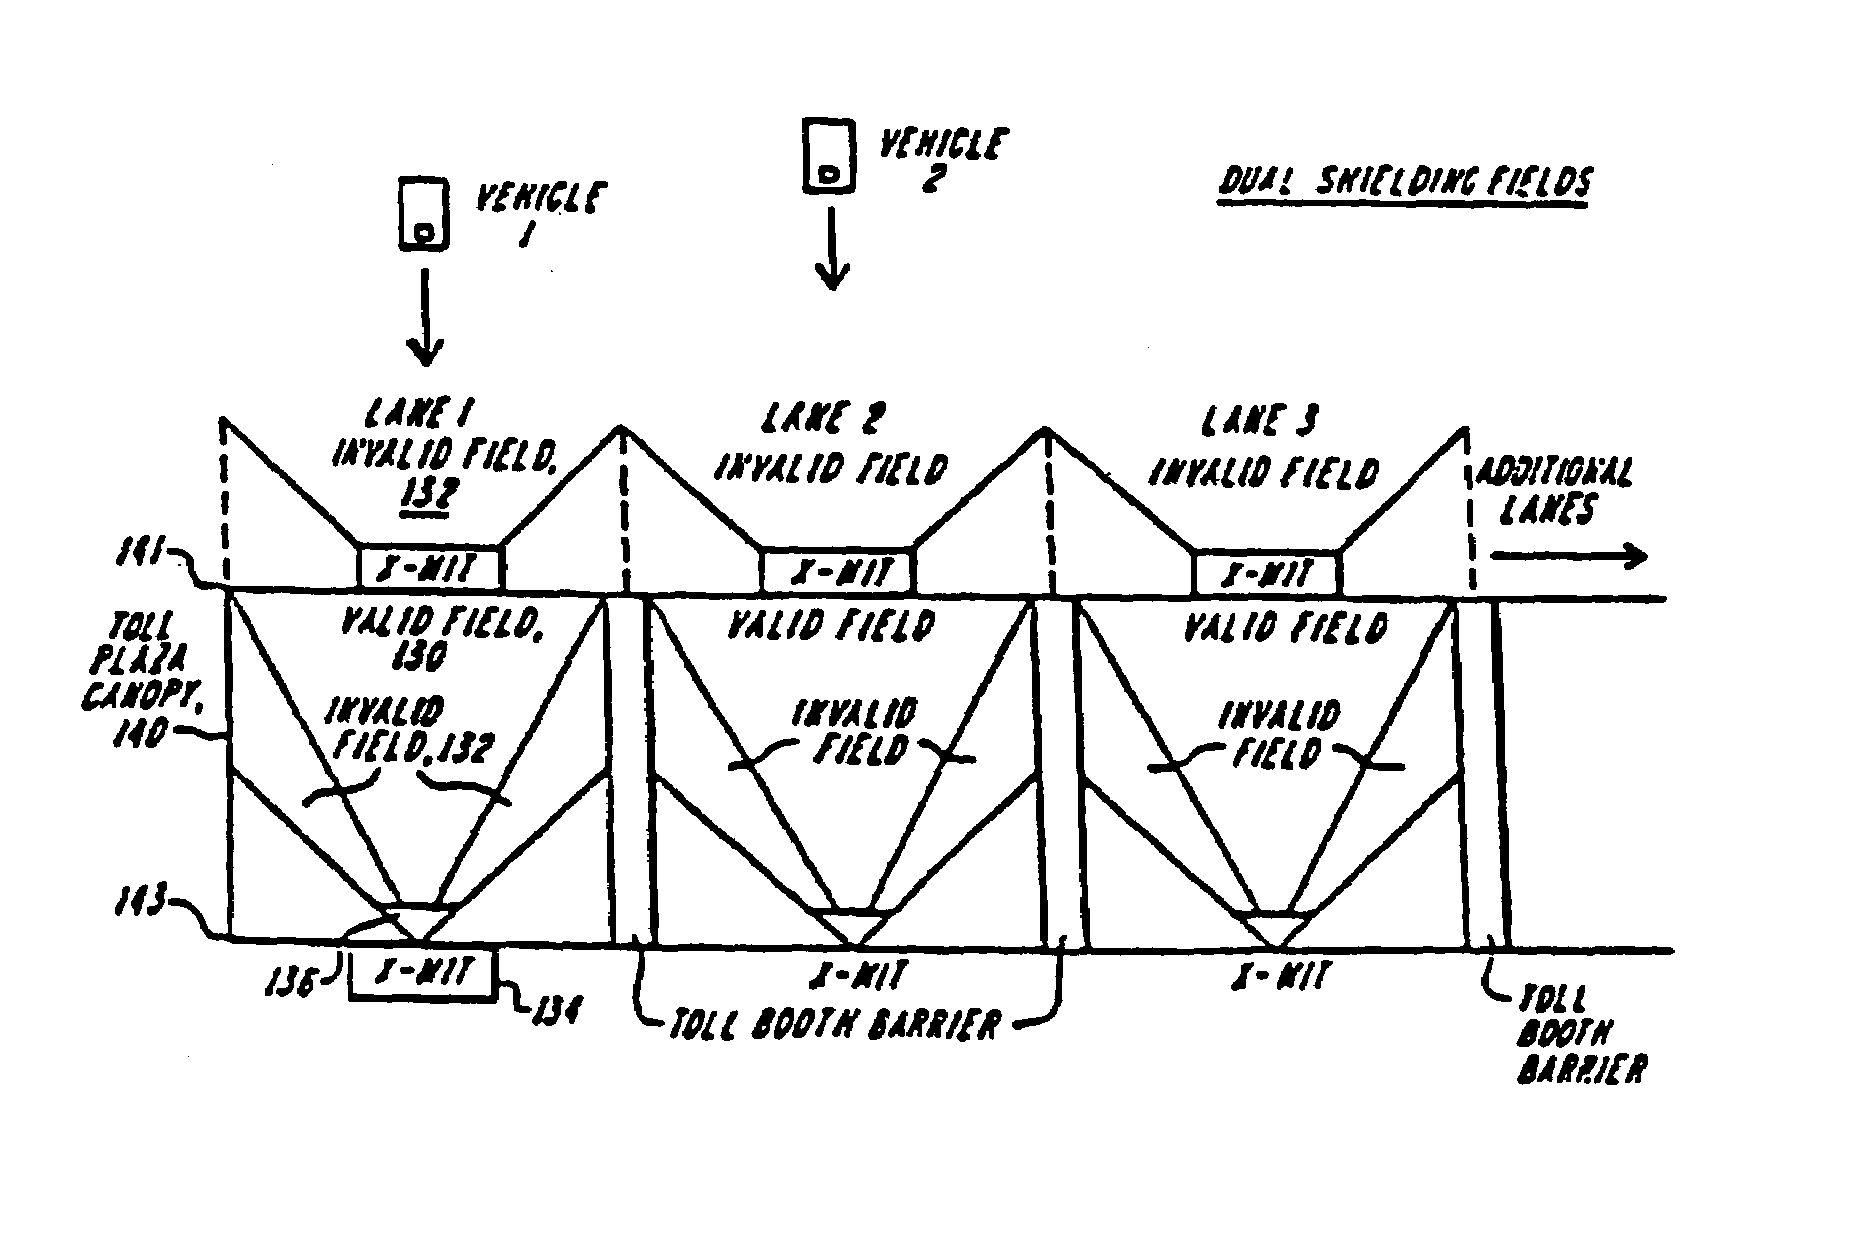 Electronic vehicle toll collection system and method